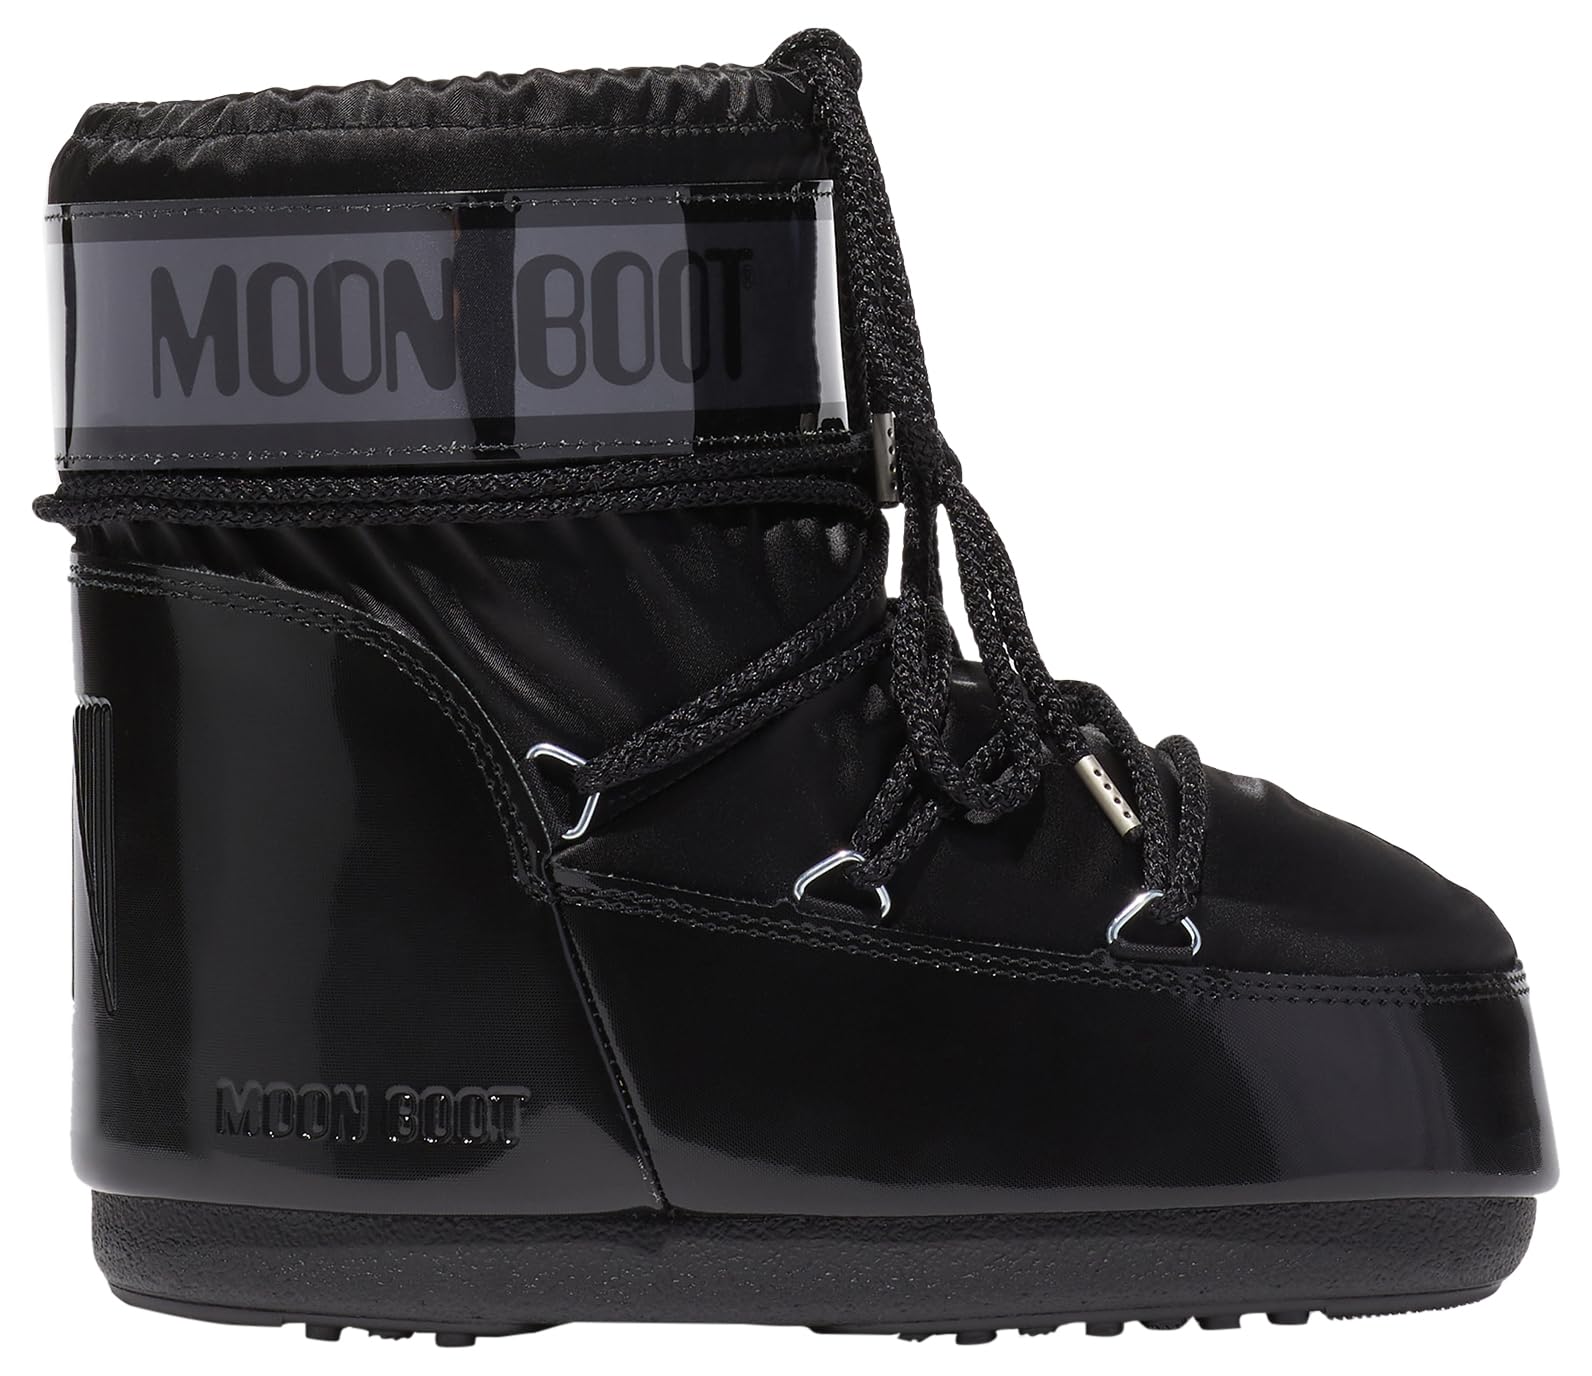 Best Selling Moon Boots: Top Picks for Lunar Footwear Enthusiasts ...